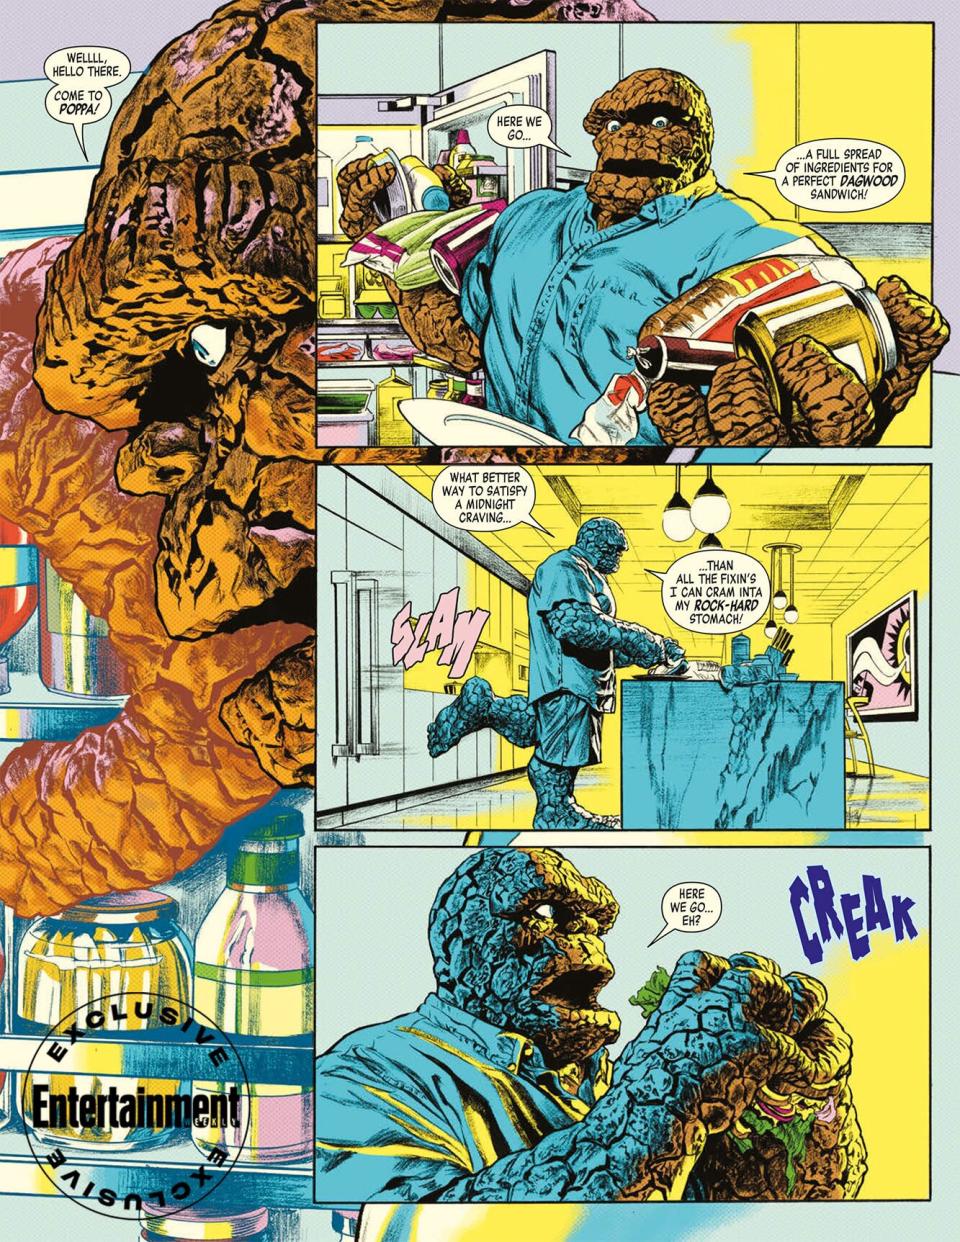 Ben Grimm is hungry in 'Fantastic Four: Full Circle'